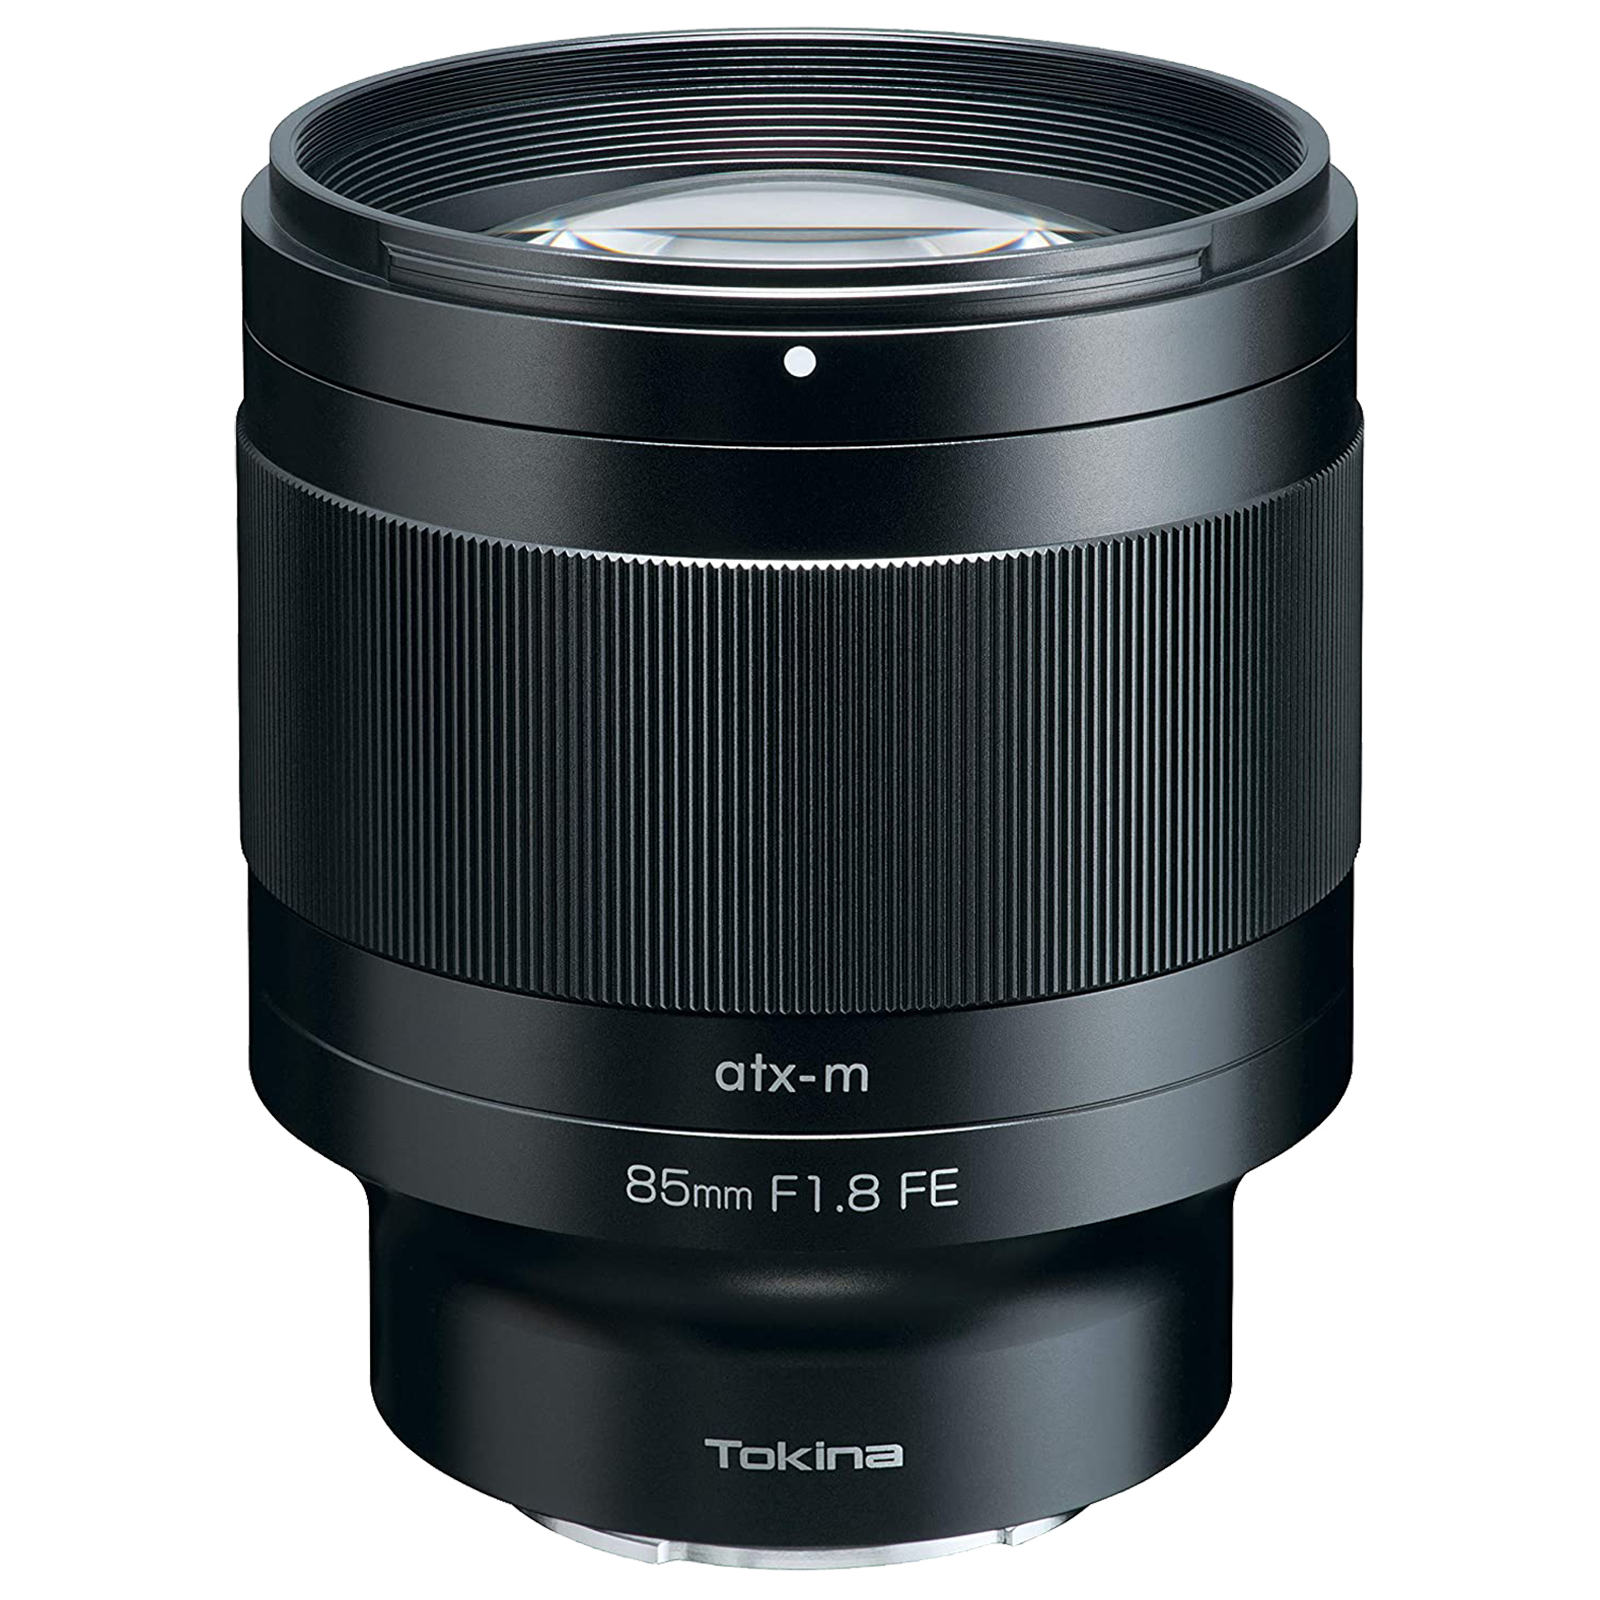 Tokina Atx-m 85 mm Max-f/1.8 And Min-f/16 Telephoto Lens (5 Axis Image Stabilization, 11D3036N01, Black)_1